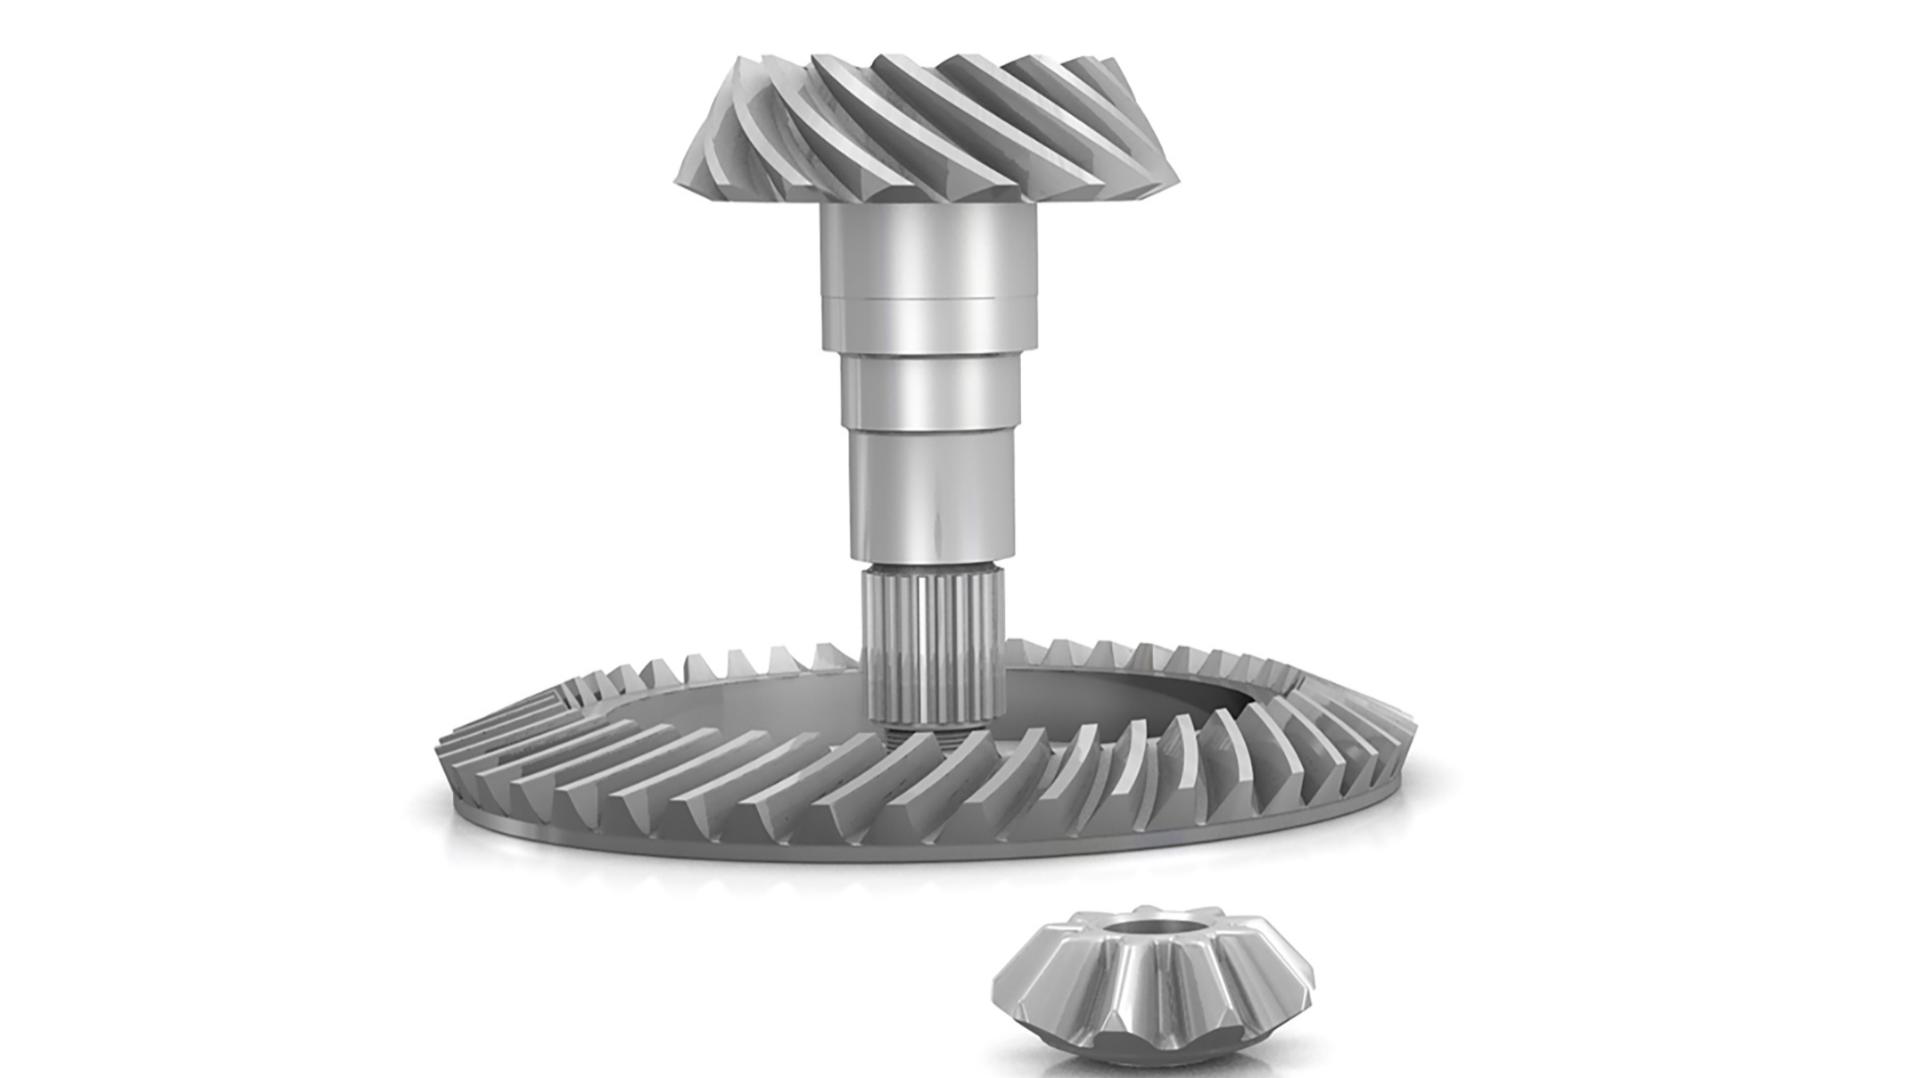 Spiral and straight bevel gear